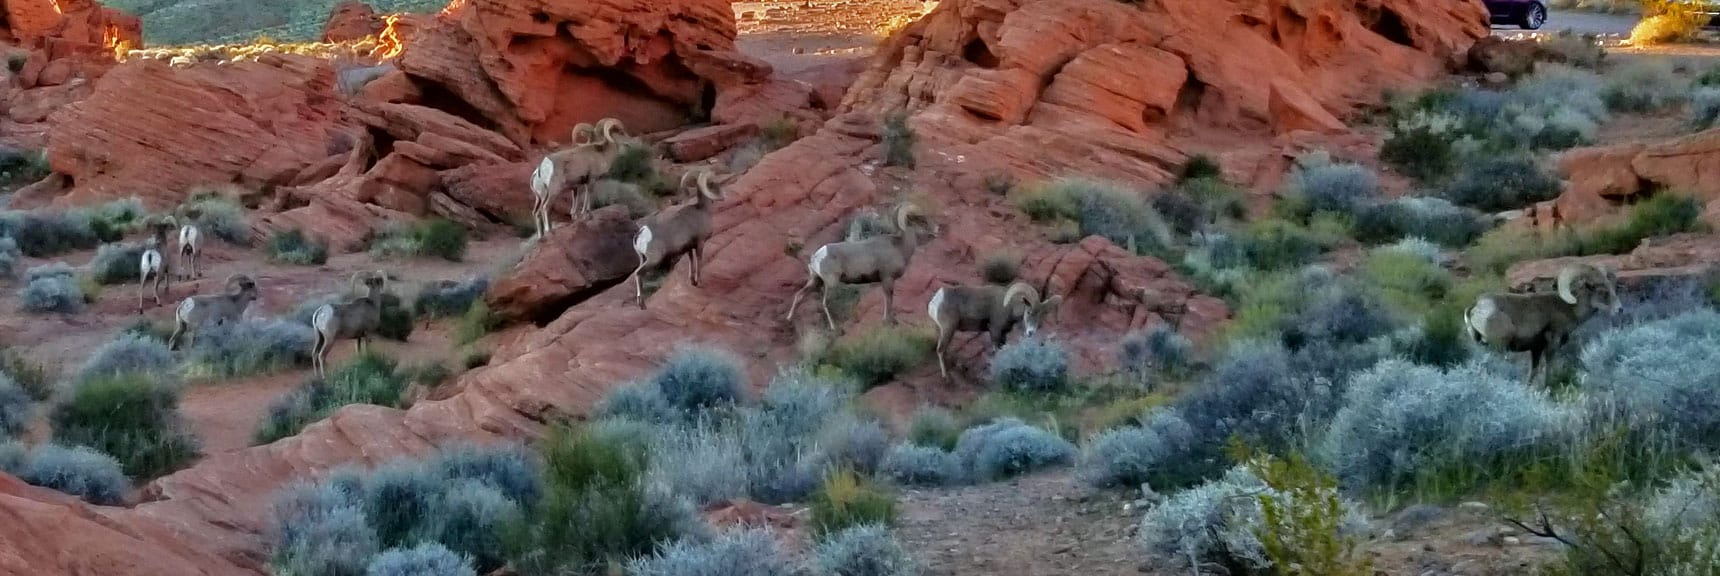 Bighorn Sheep at Beehives in Valley of Fire State Park, Nevada Slide 009